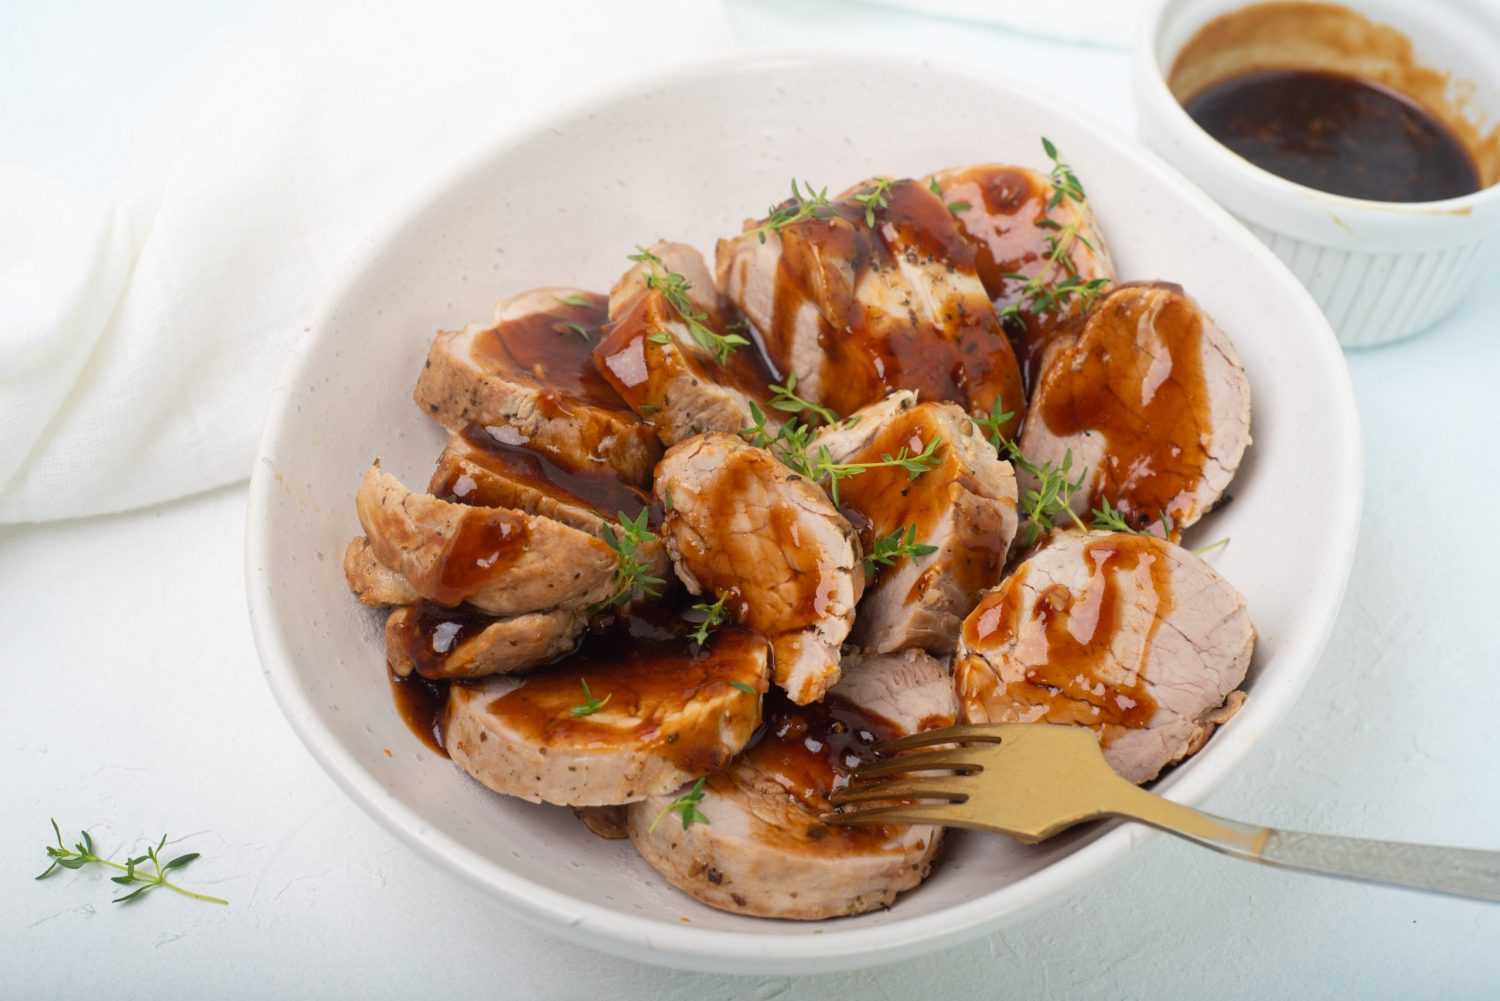 Pork medallions glazed with soy sauce in a bowl with metal fork and sage leaves